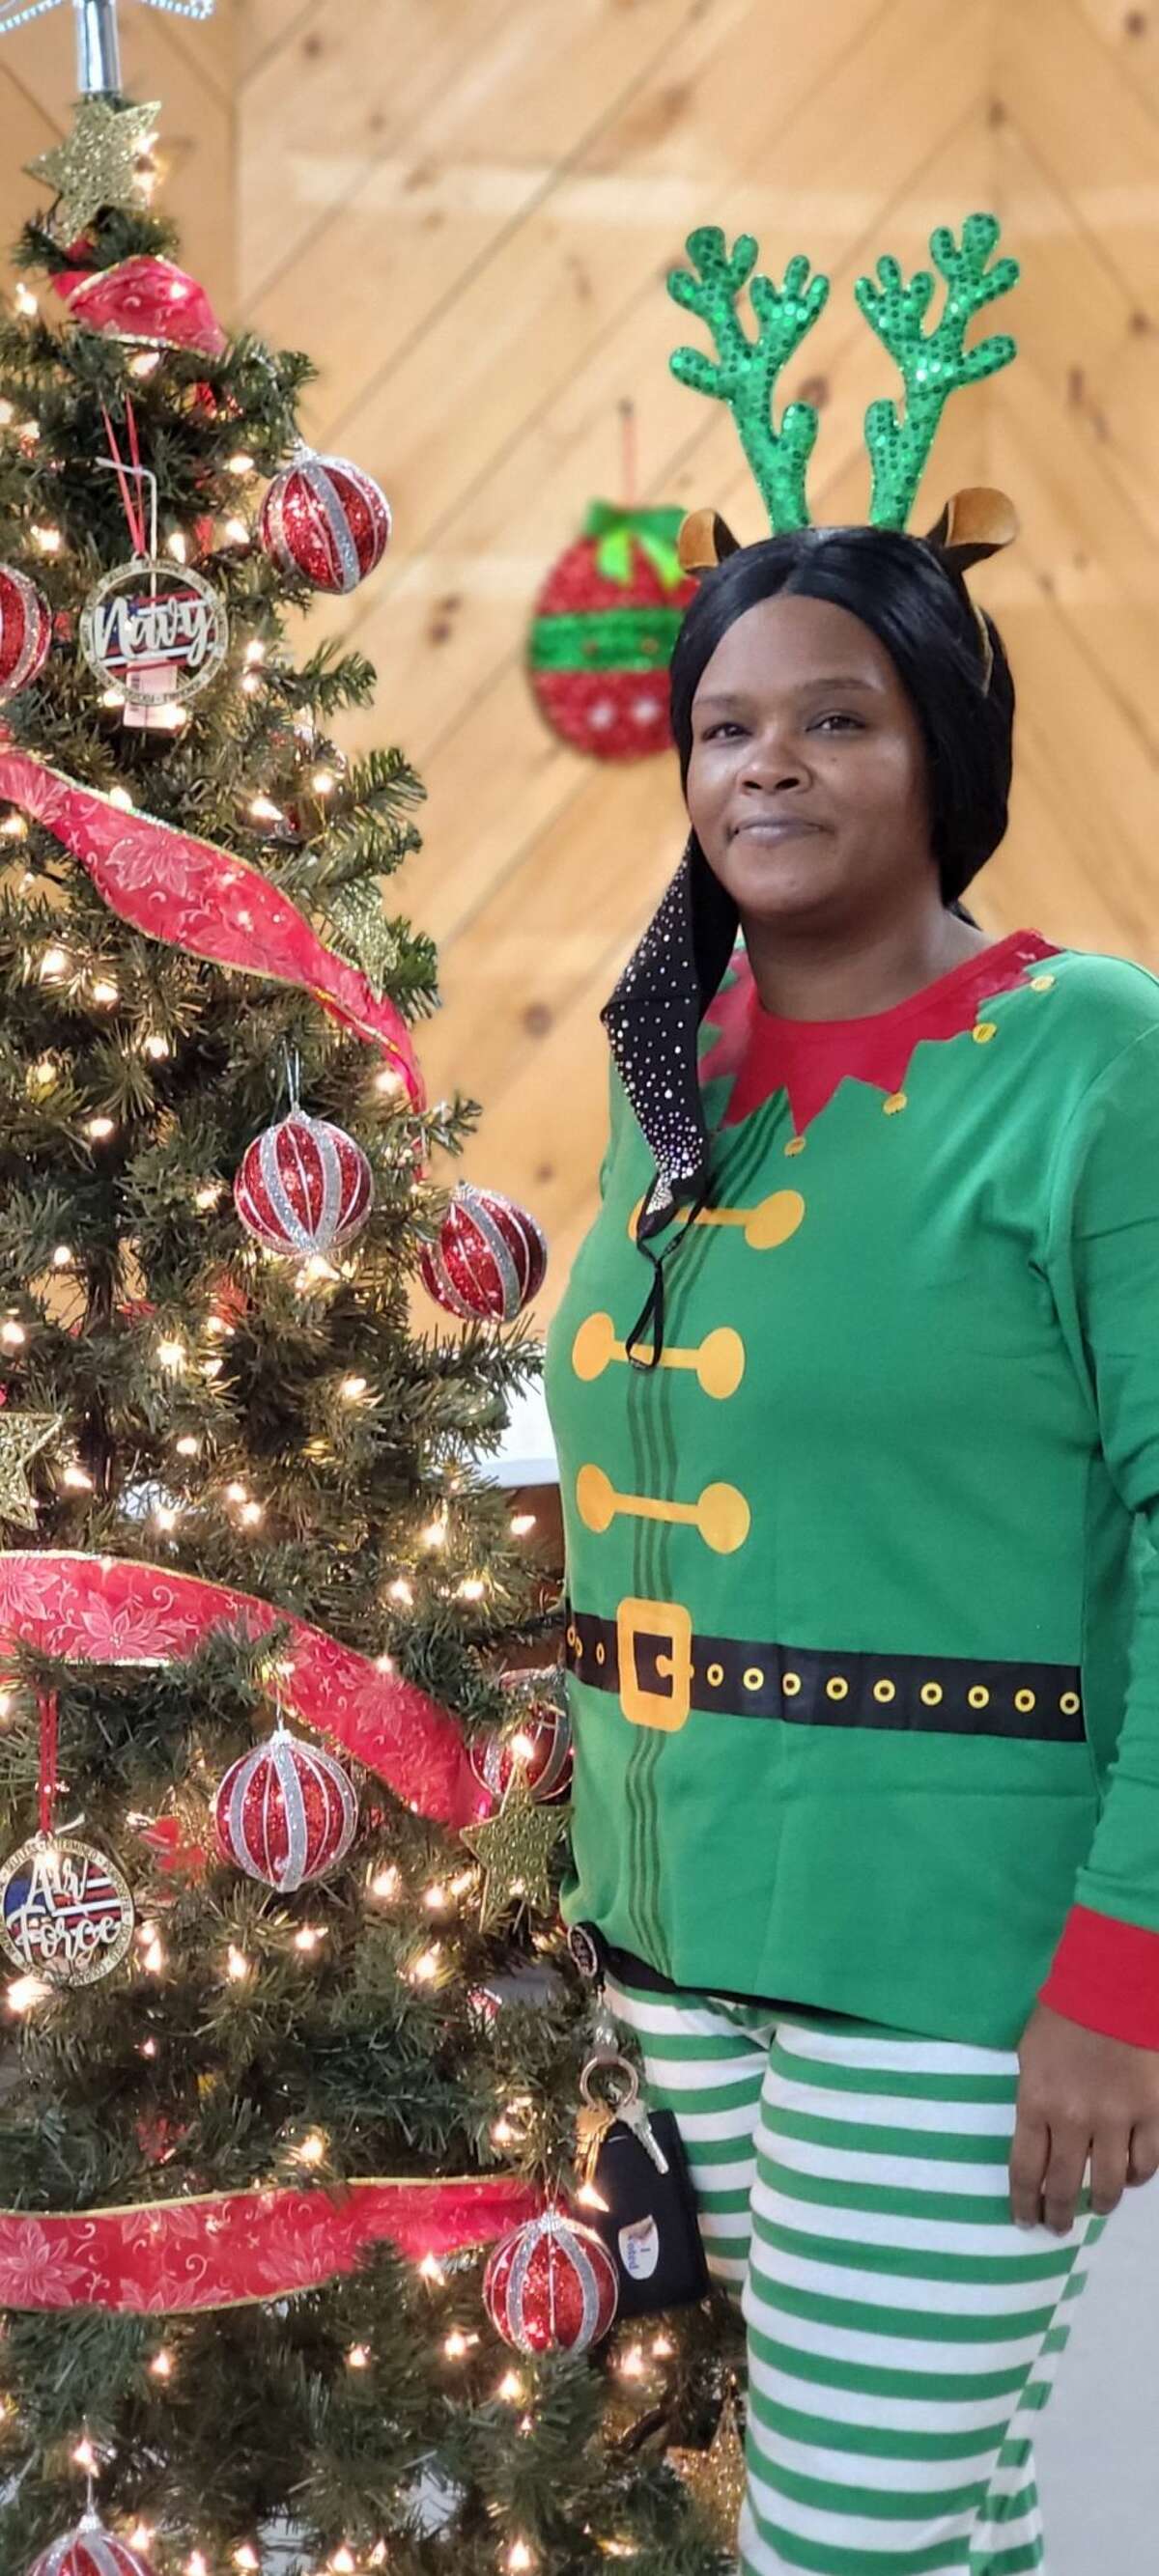 LaShawn Hawkins poses with a Christmas Tree dressed as one of Santa's Elves